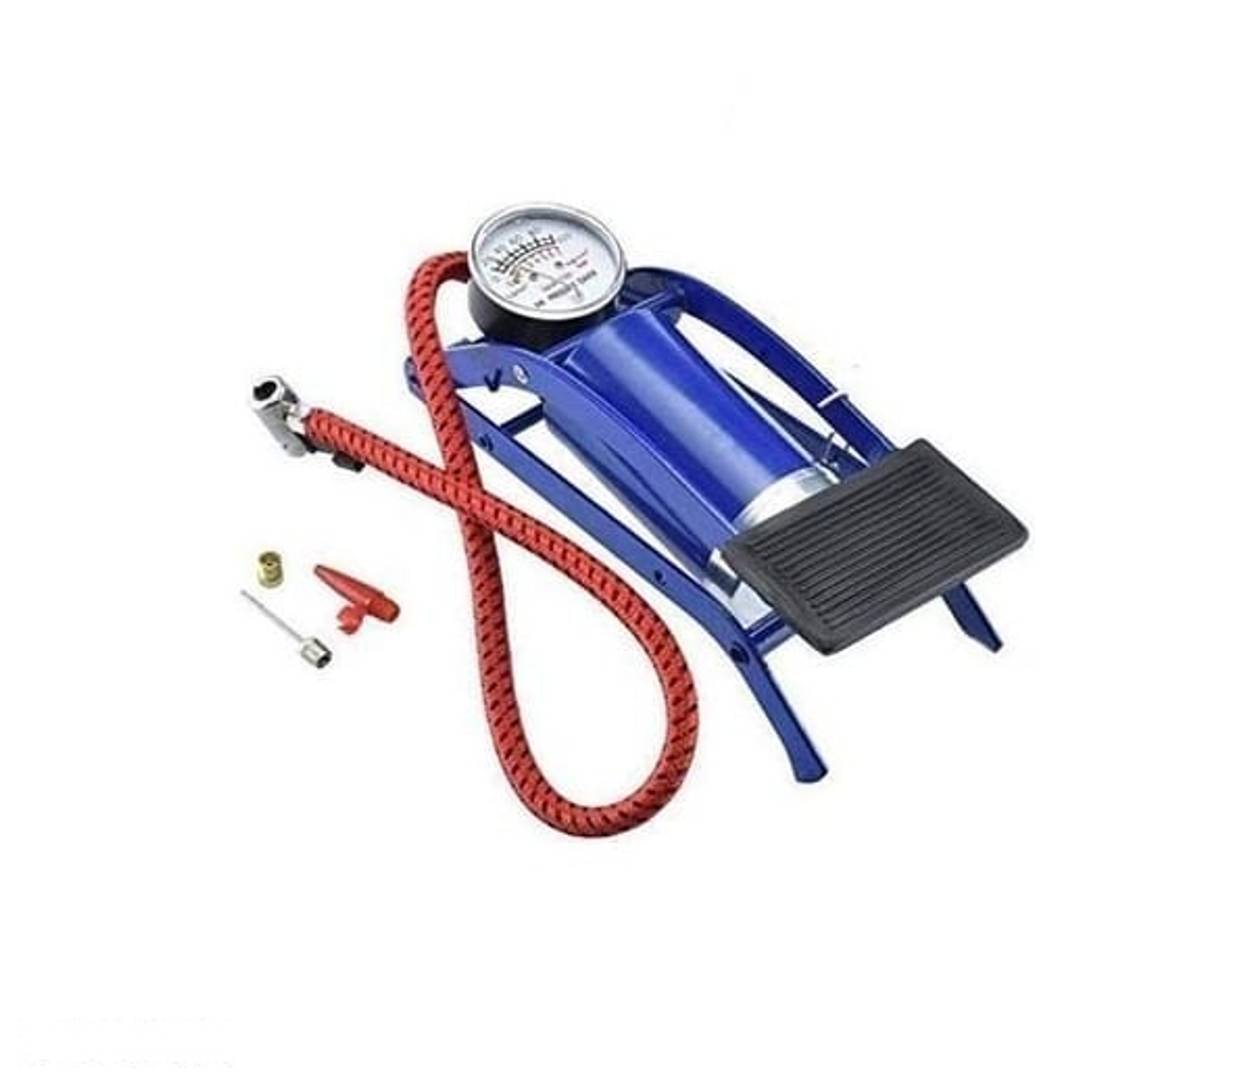 Portable Foot Air Pump Compressor for Car and Bike Air Pump for Motorbike,Cars,Bicycle,for Football,Cycle Pumps for Bicycle,car air Pump for tubeless (Foot Pump)